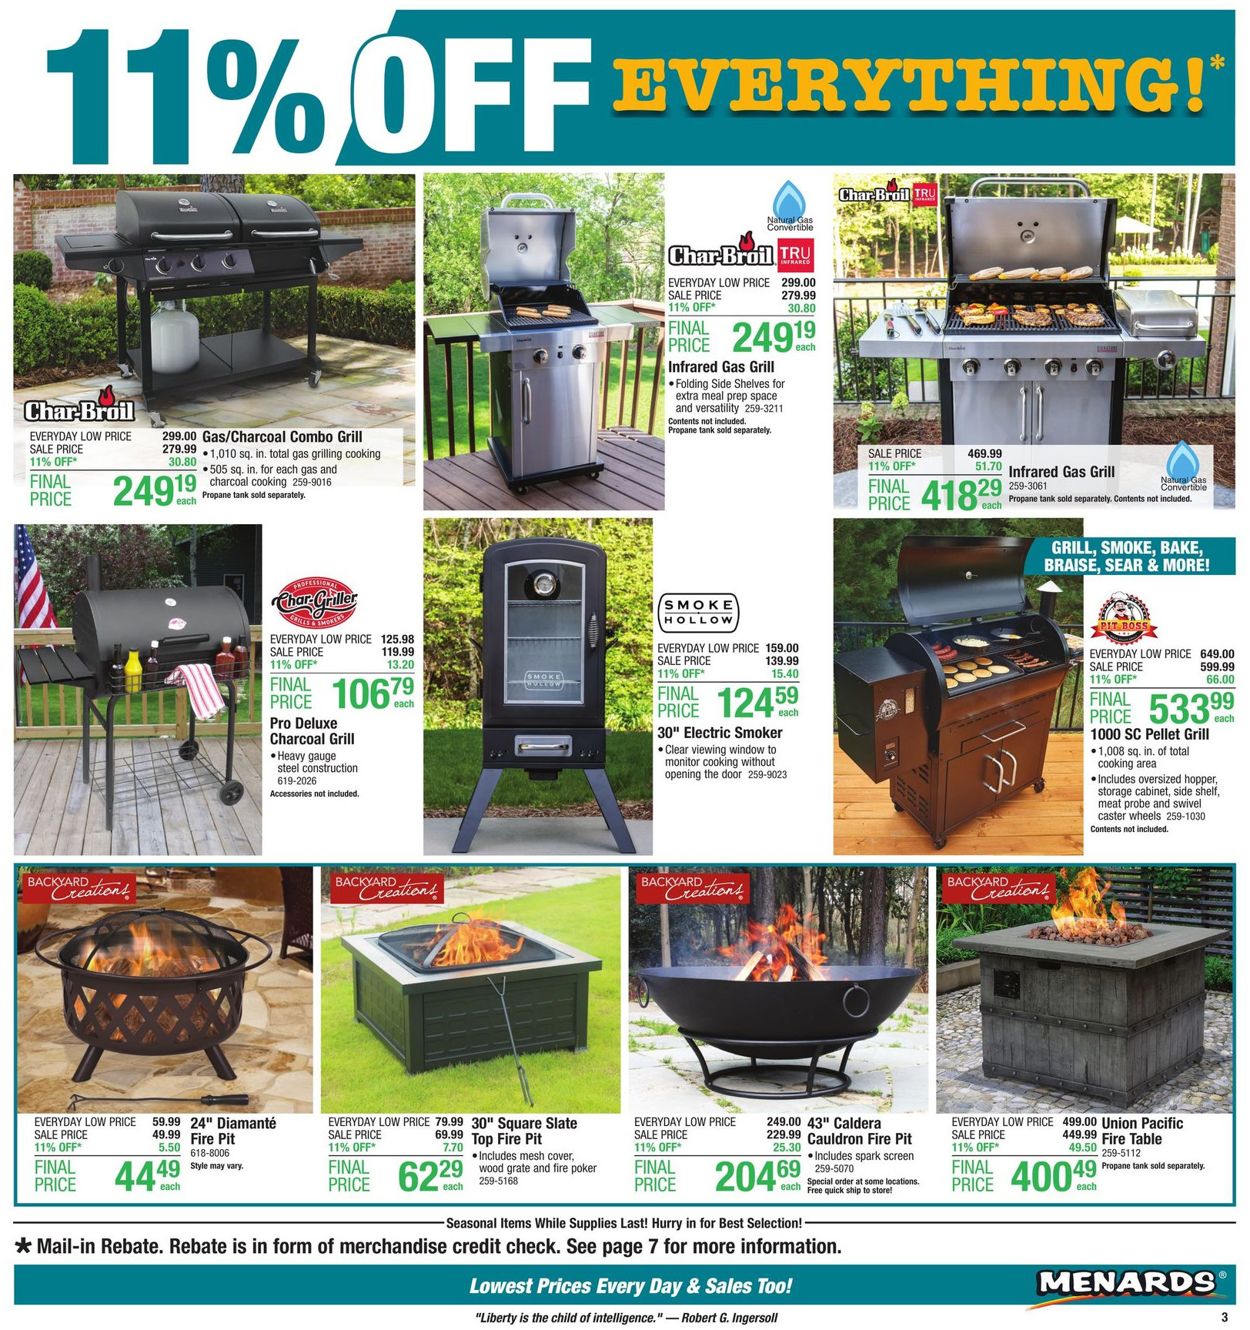 Menards Current weekly ad 06/16 - 06/22/2019 [4] - 0